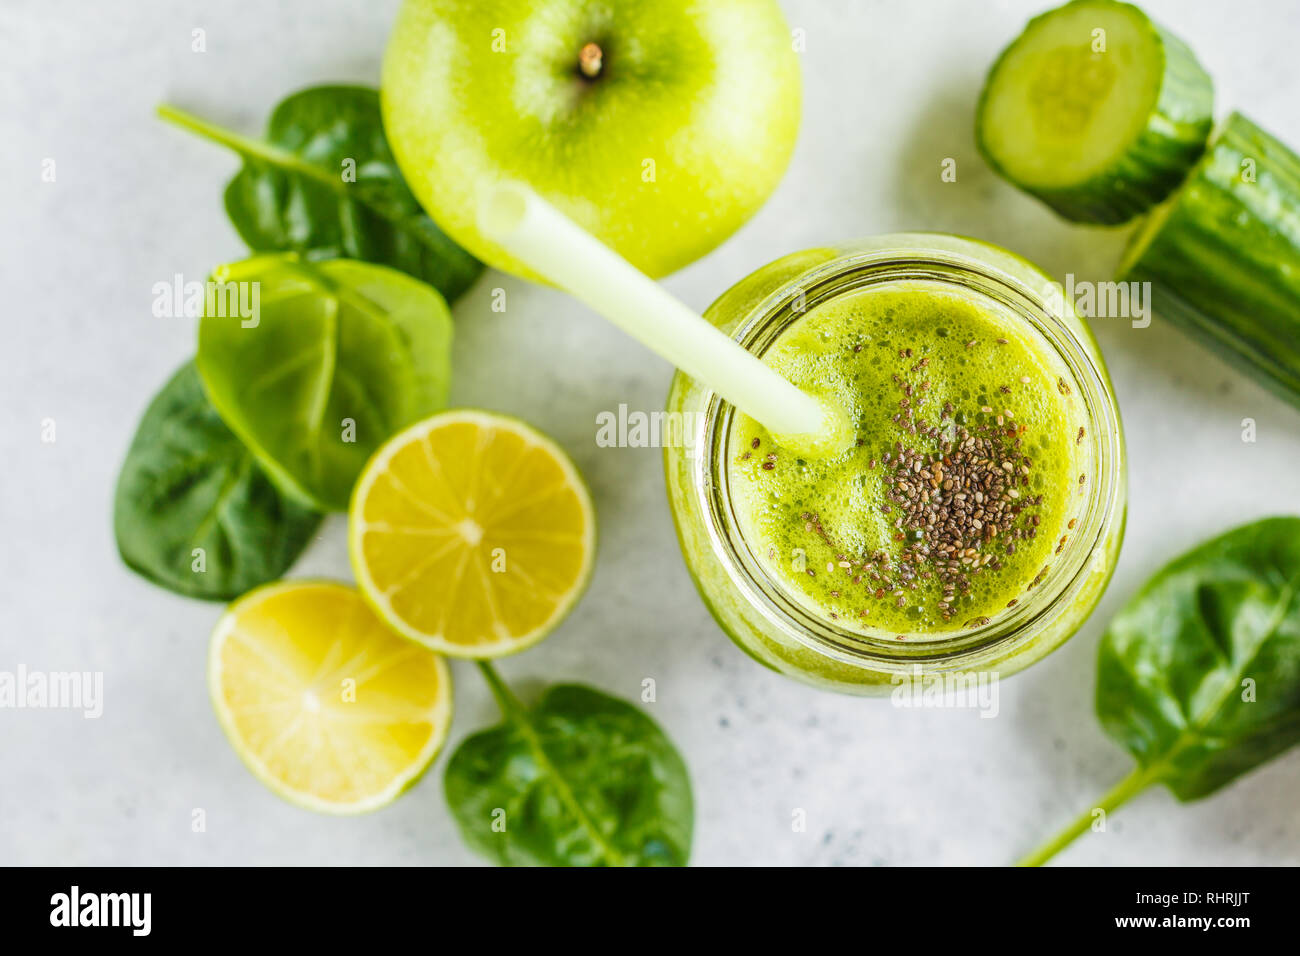 Green healthy smoothie (juice) in the jar. Apple, spinach, cucumber smoothie on a white background with the ingredients. Stock Photo